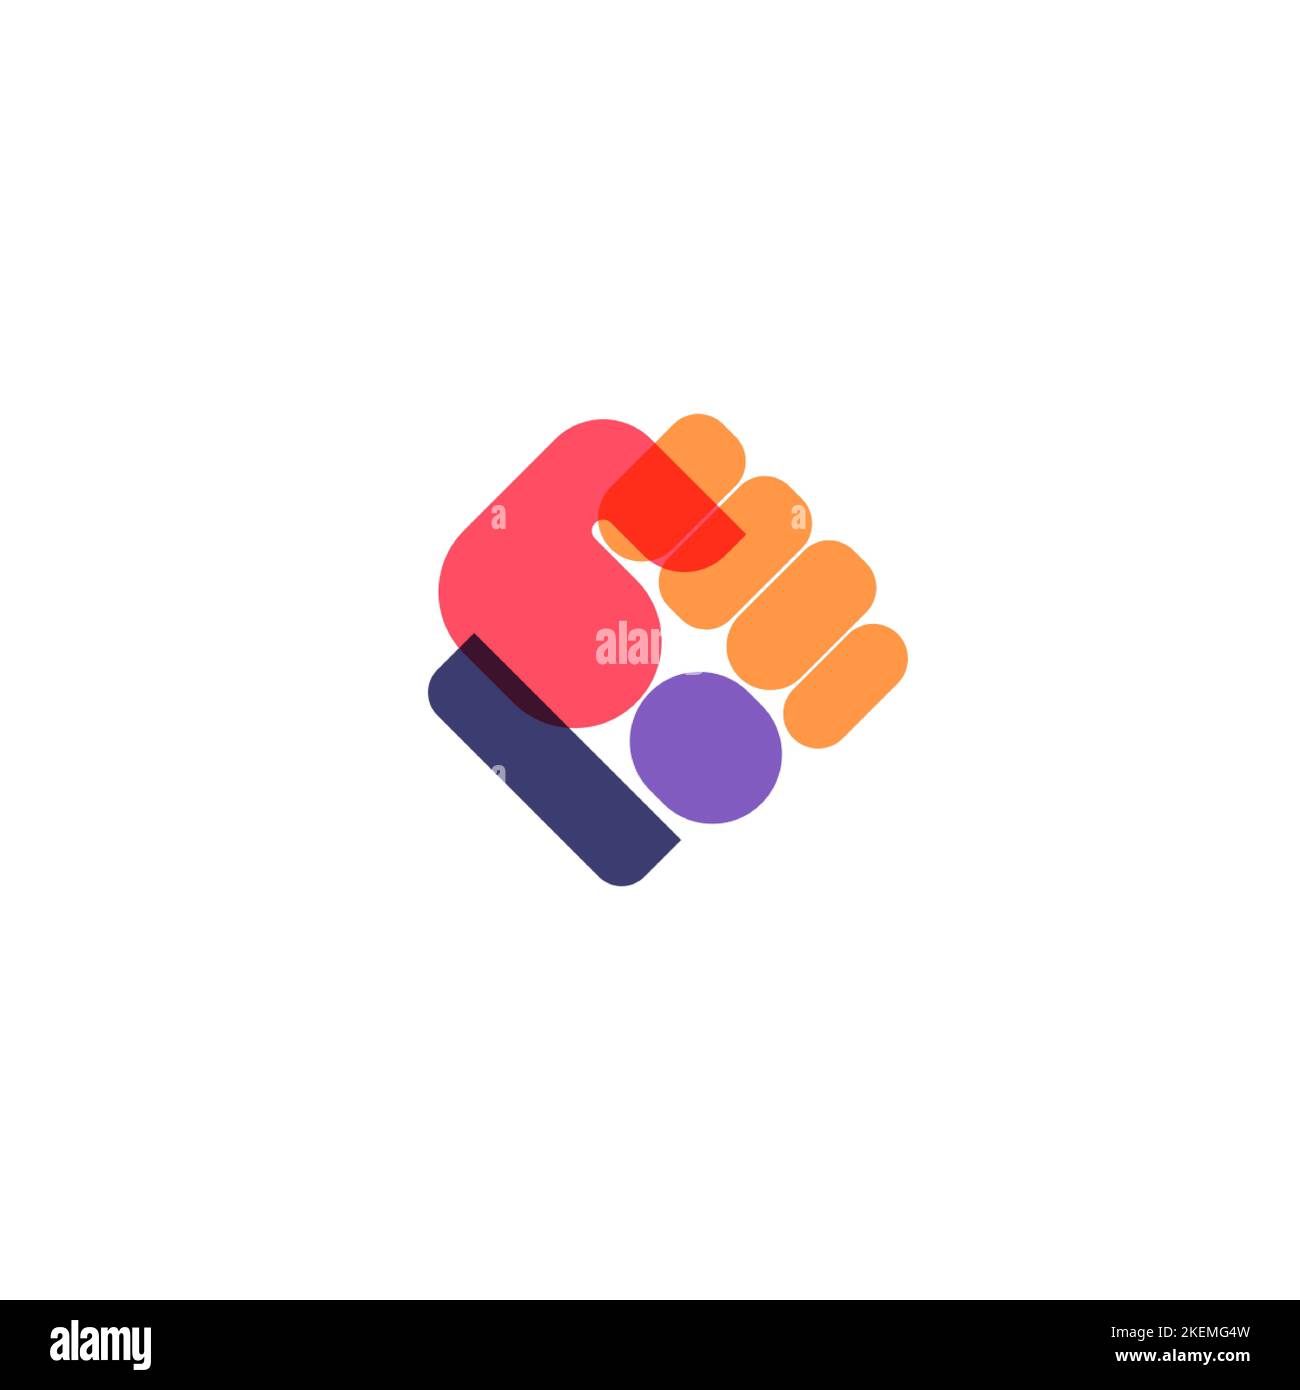 Clenched palm in fist, cubism style abstract logo design. Bright colored flat geometric figures, vector icon of geometric primitives. Forse strength Stock Vector